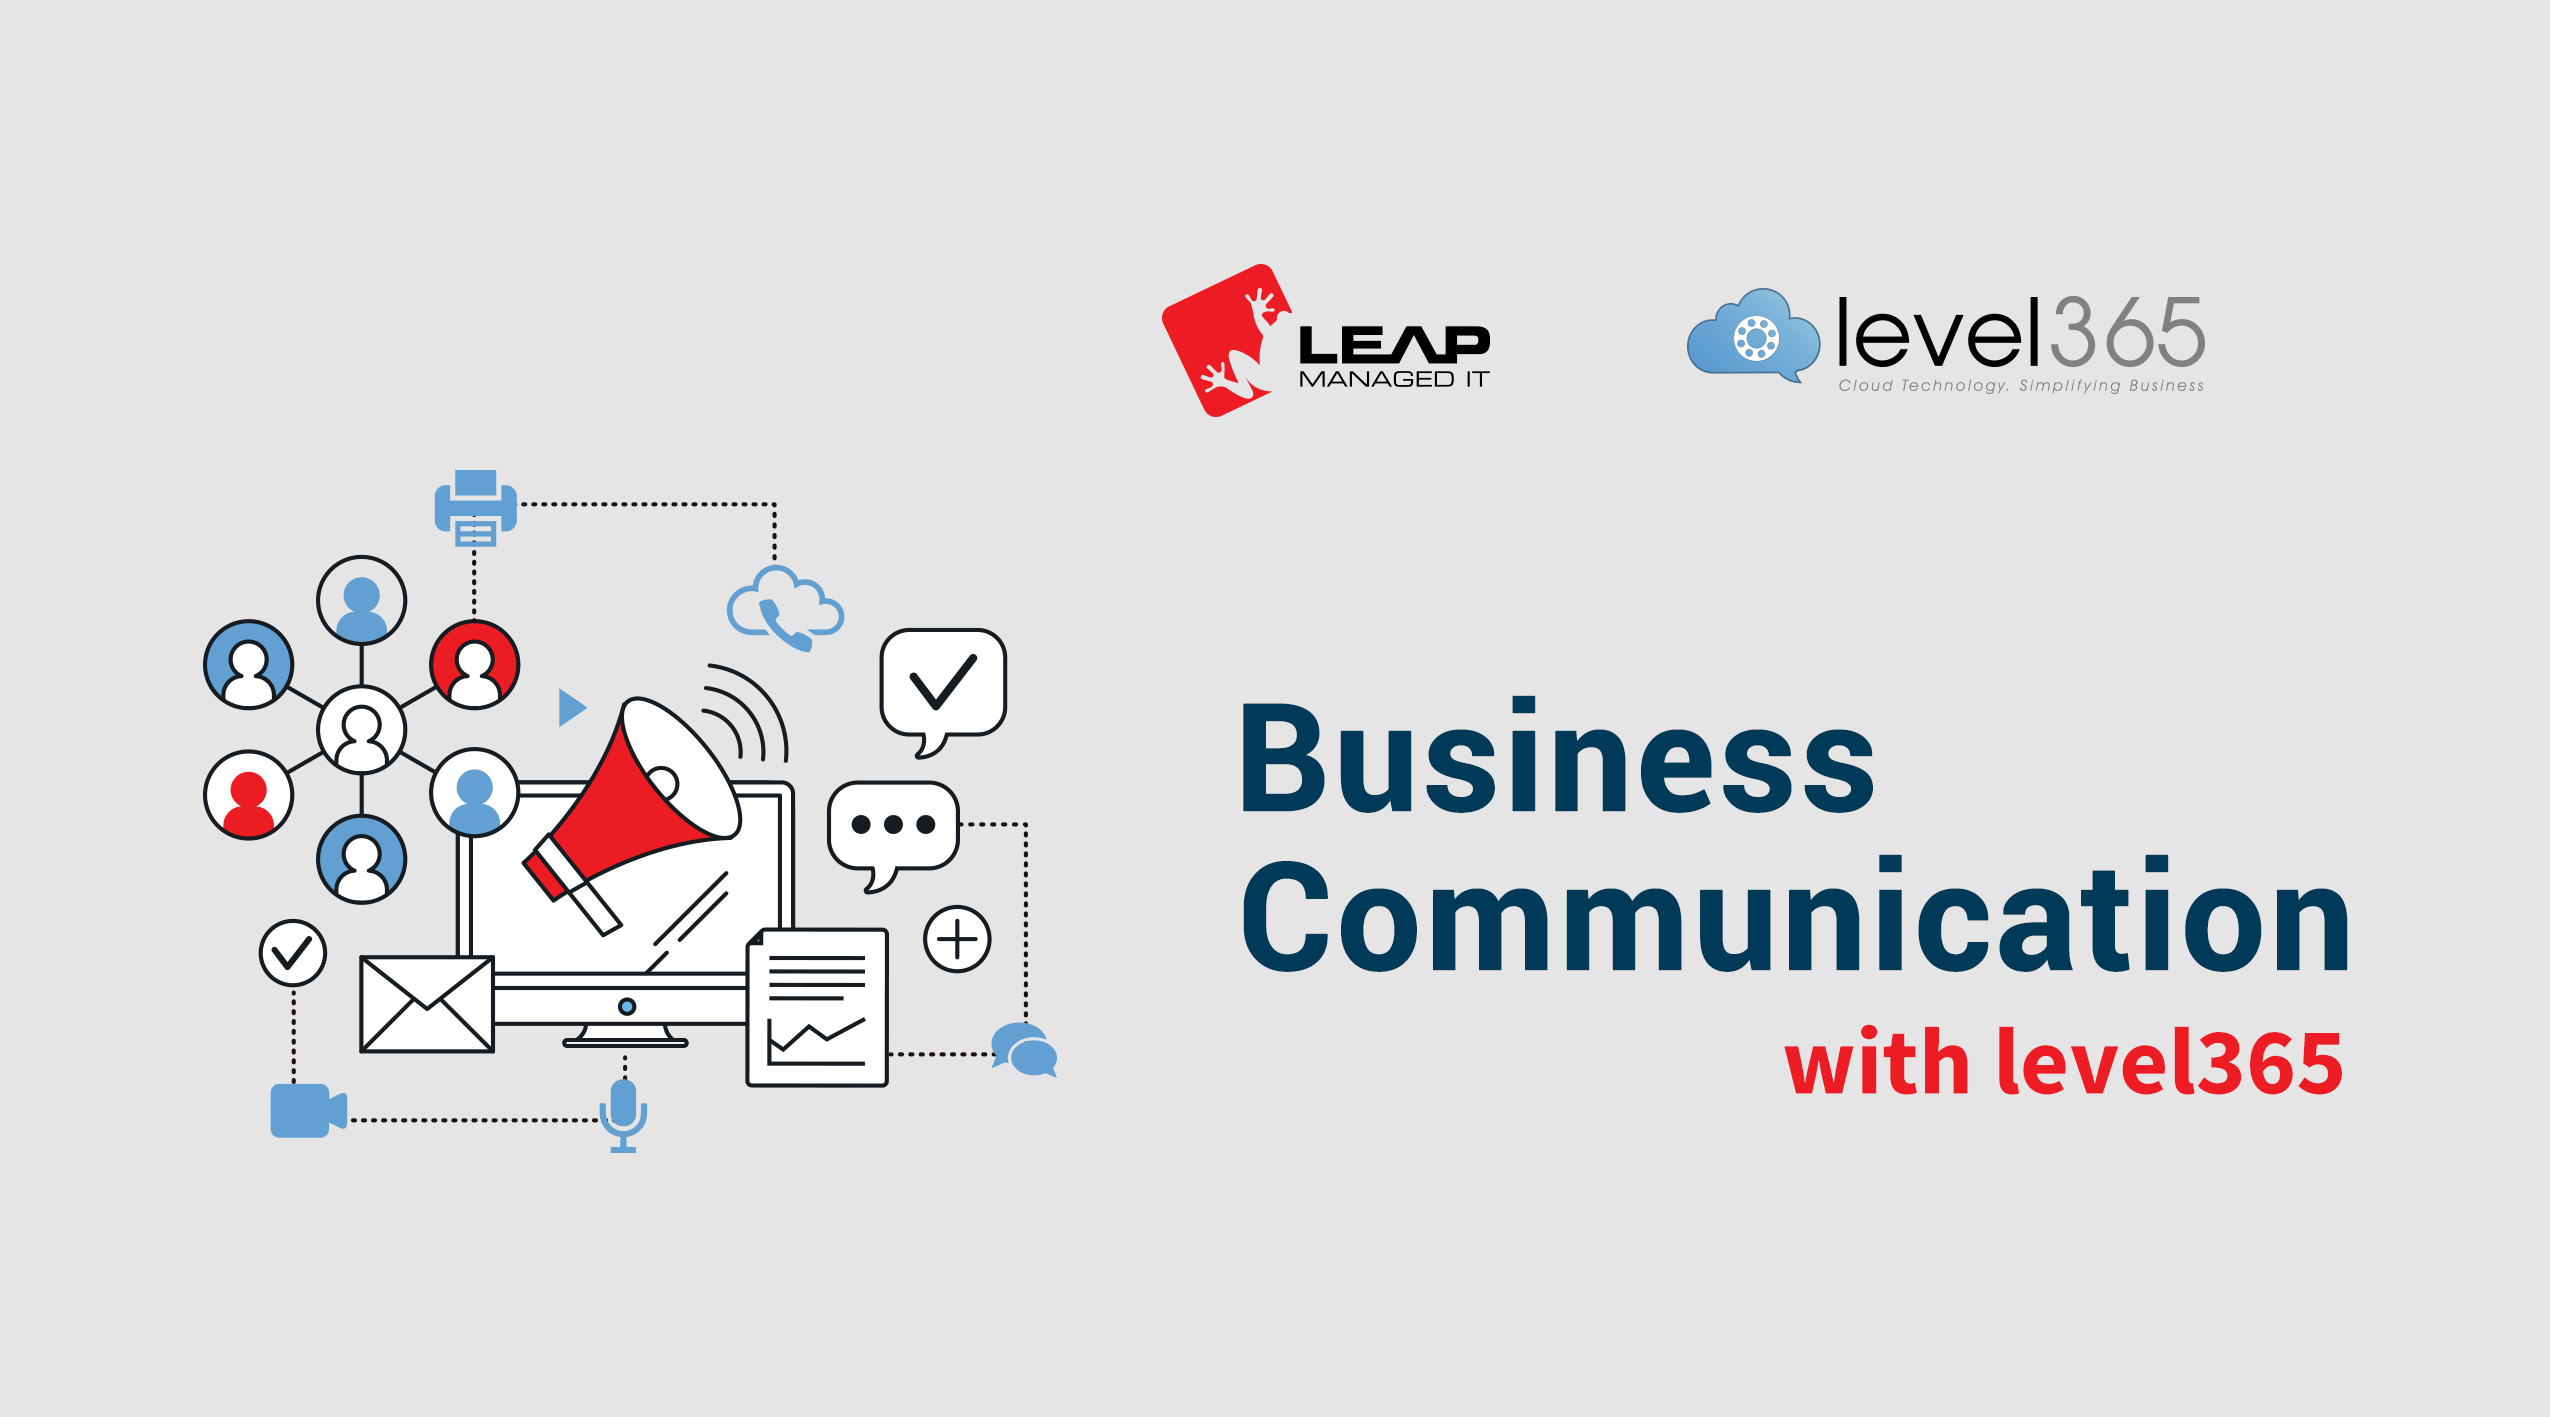 Business Communication with Level365